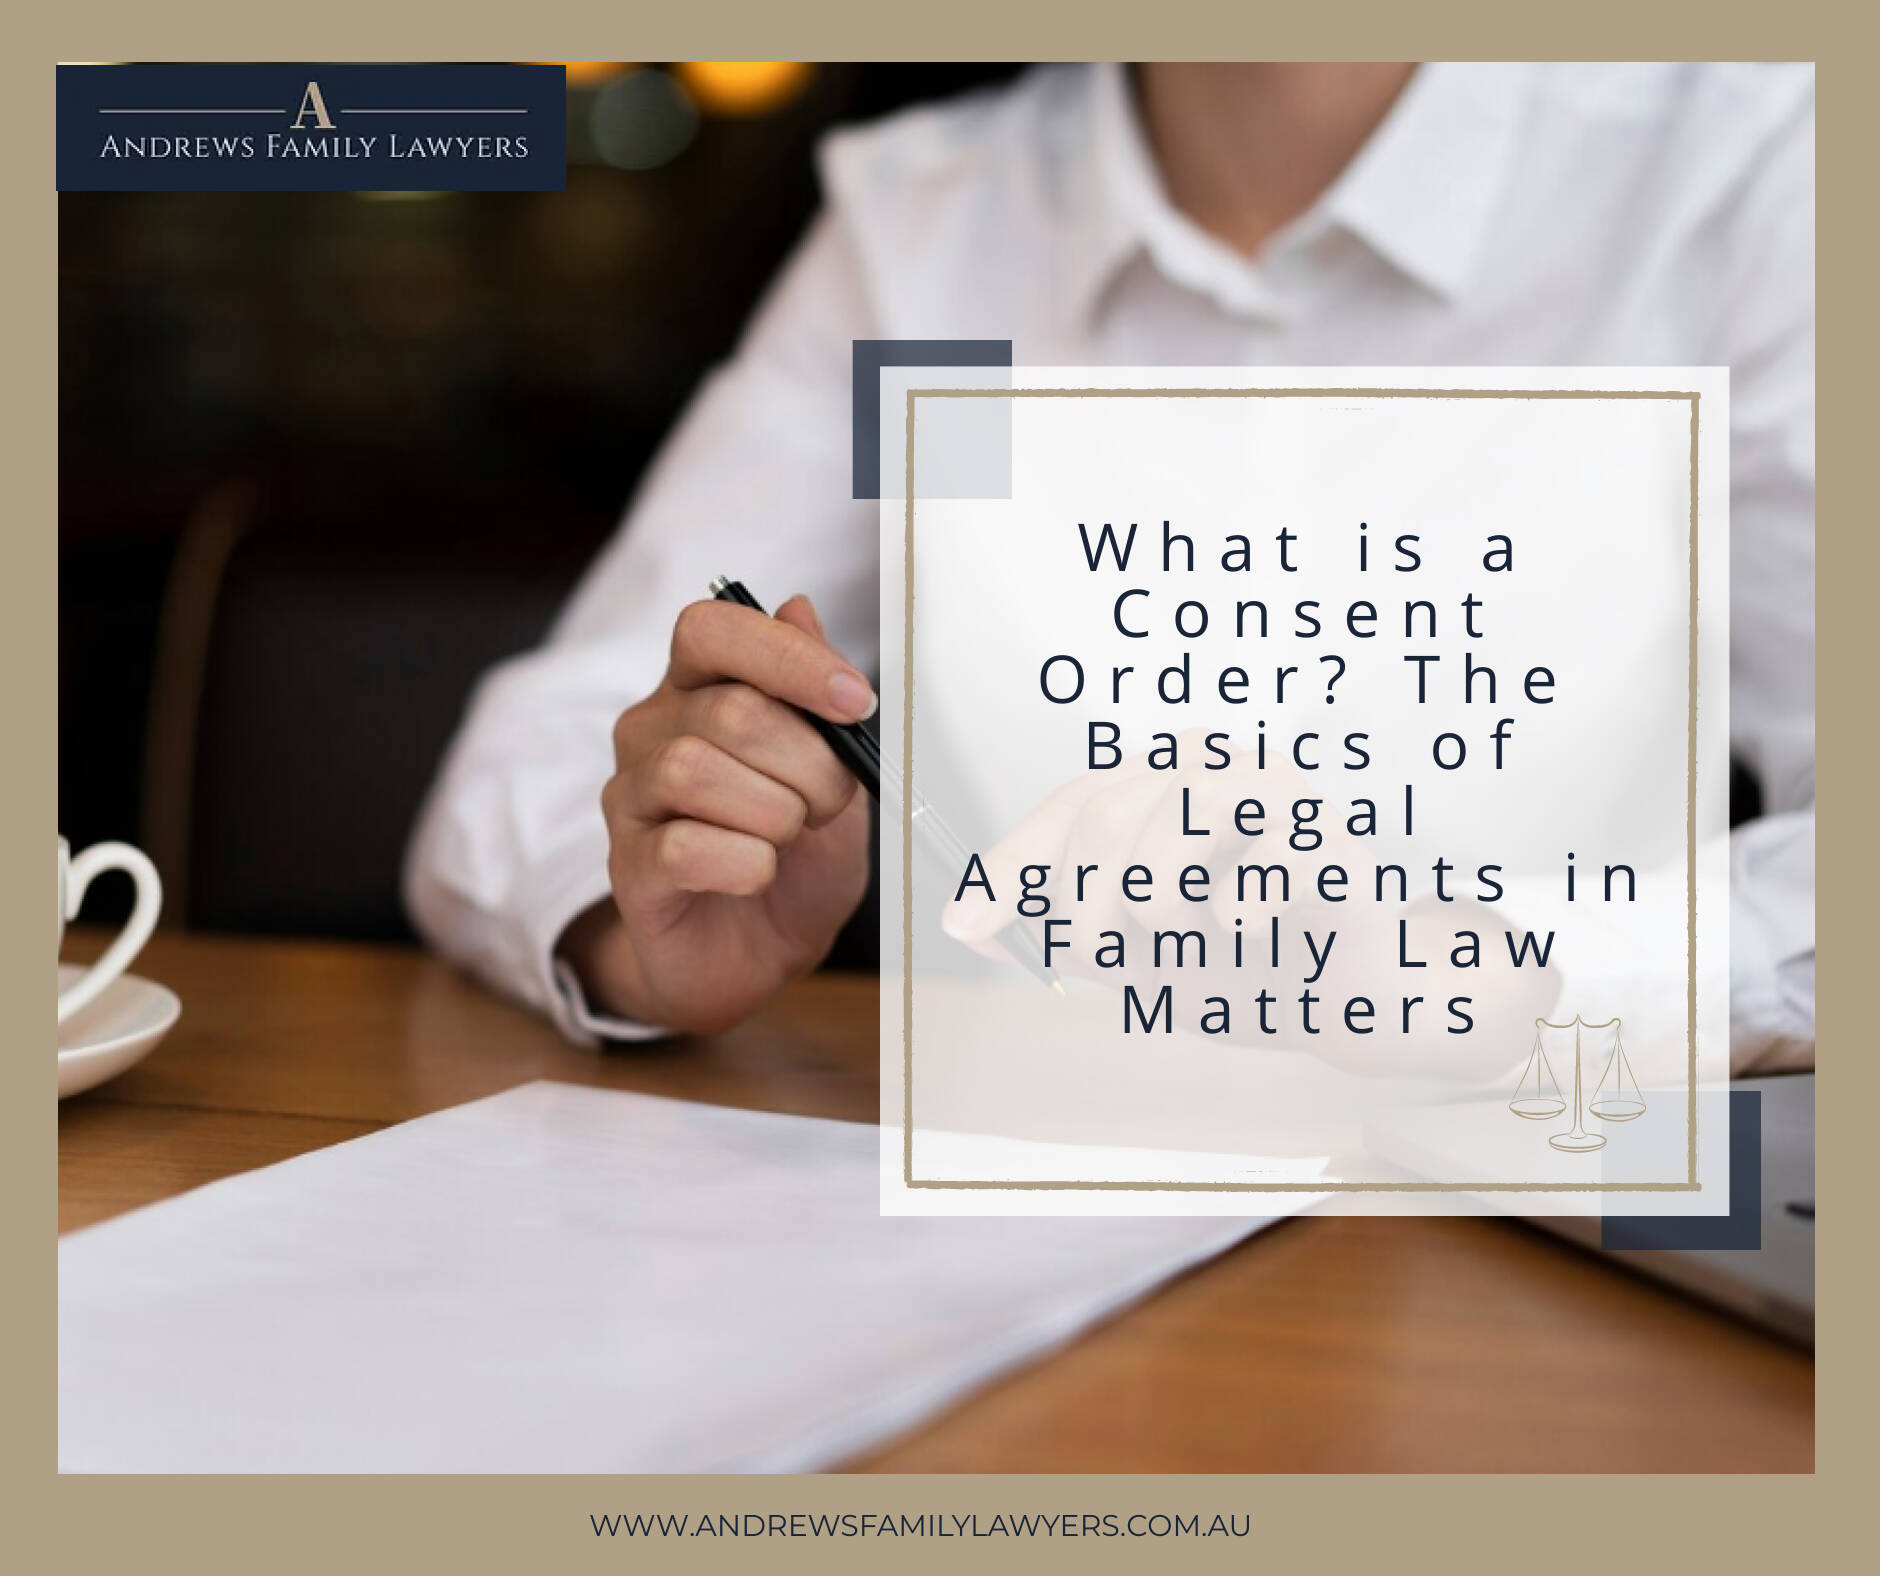 What is a Consent Order? The Basics of Legal Agreements in Family Law Matters